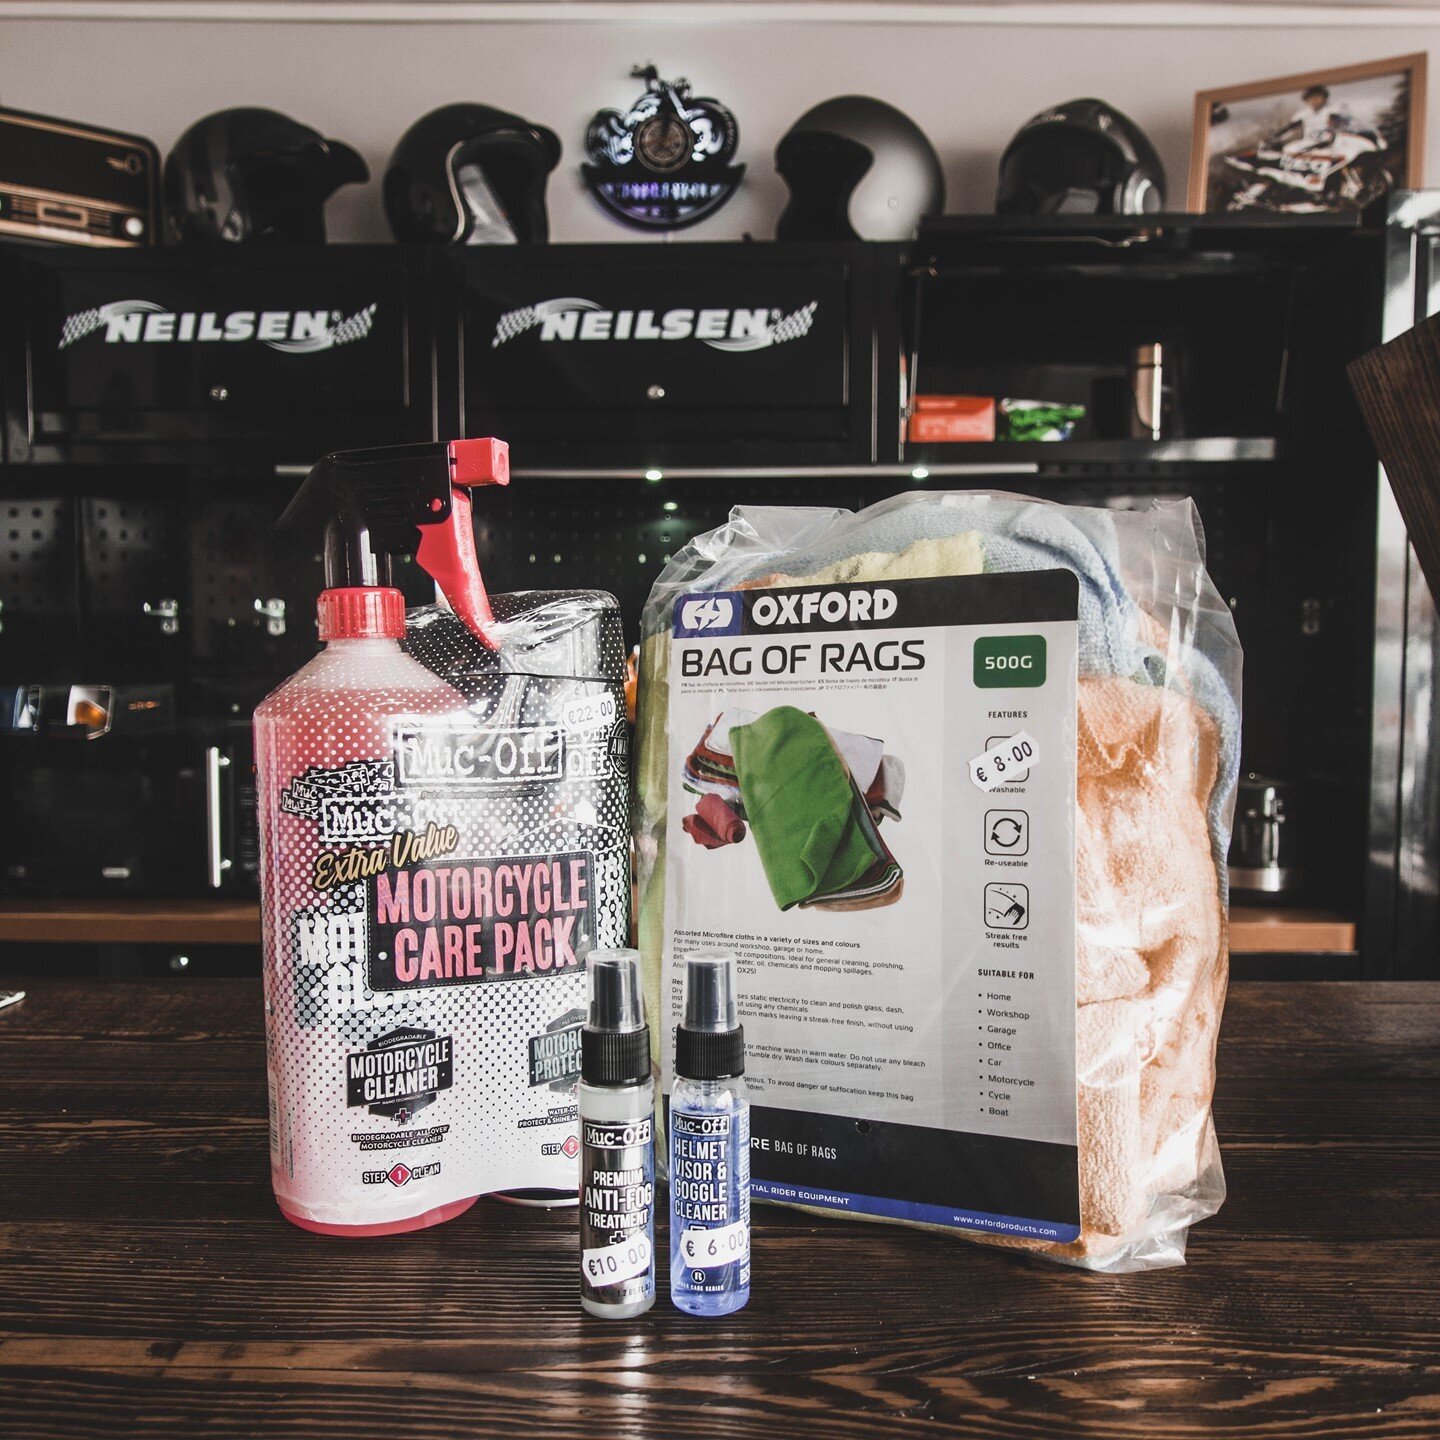 Ya have to keep those bikes clean in this weather. ⁠
This fab-YULE-us collection of Motorcycle Care products is just the ticket. ⁠
⁠
- Oxford  Bag of Rags &euro;8⁠
- Motorcycle Care Pack &euro;22⁠
- Anti-Fog Mini &euro;10⁠
- Visor Cleaner Mini &euro;